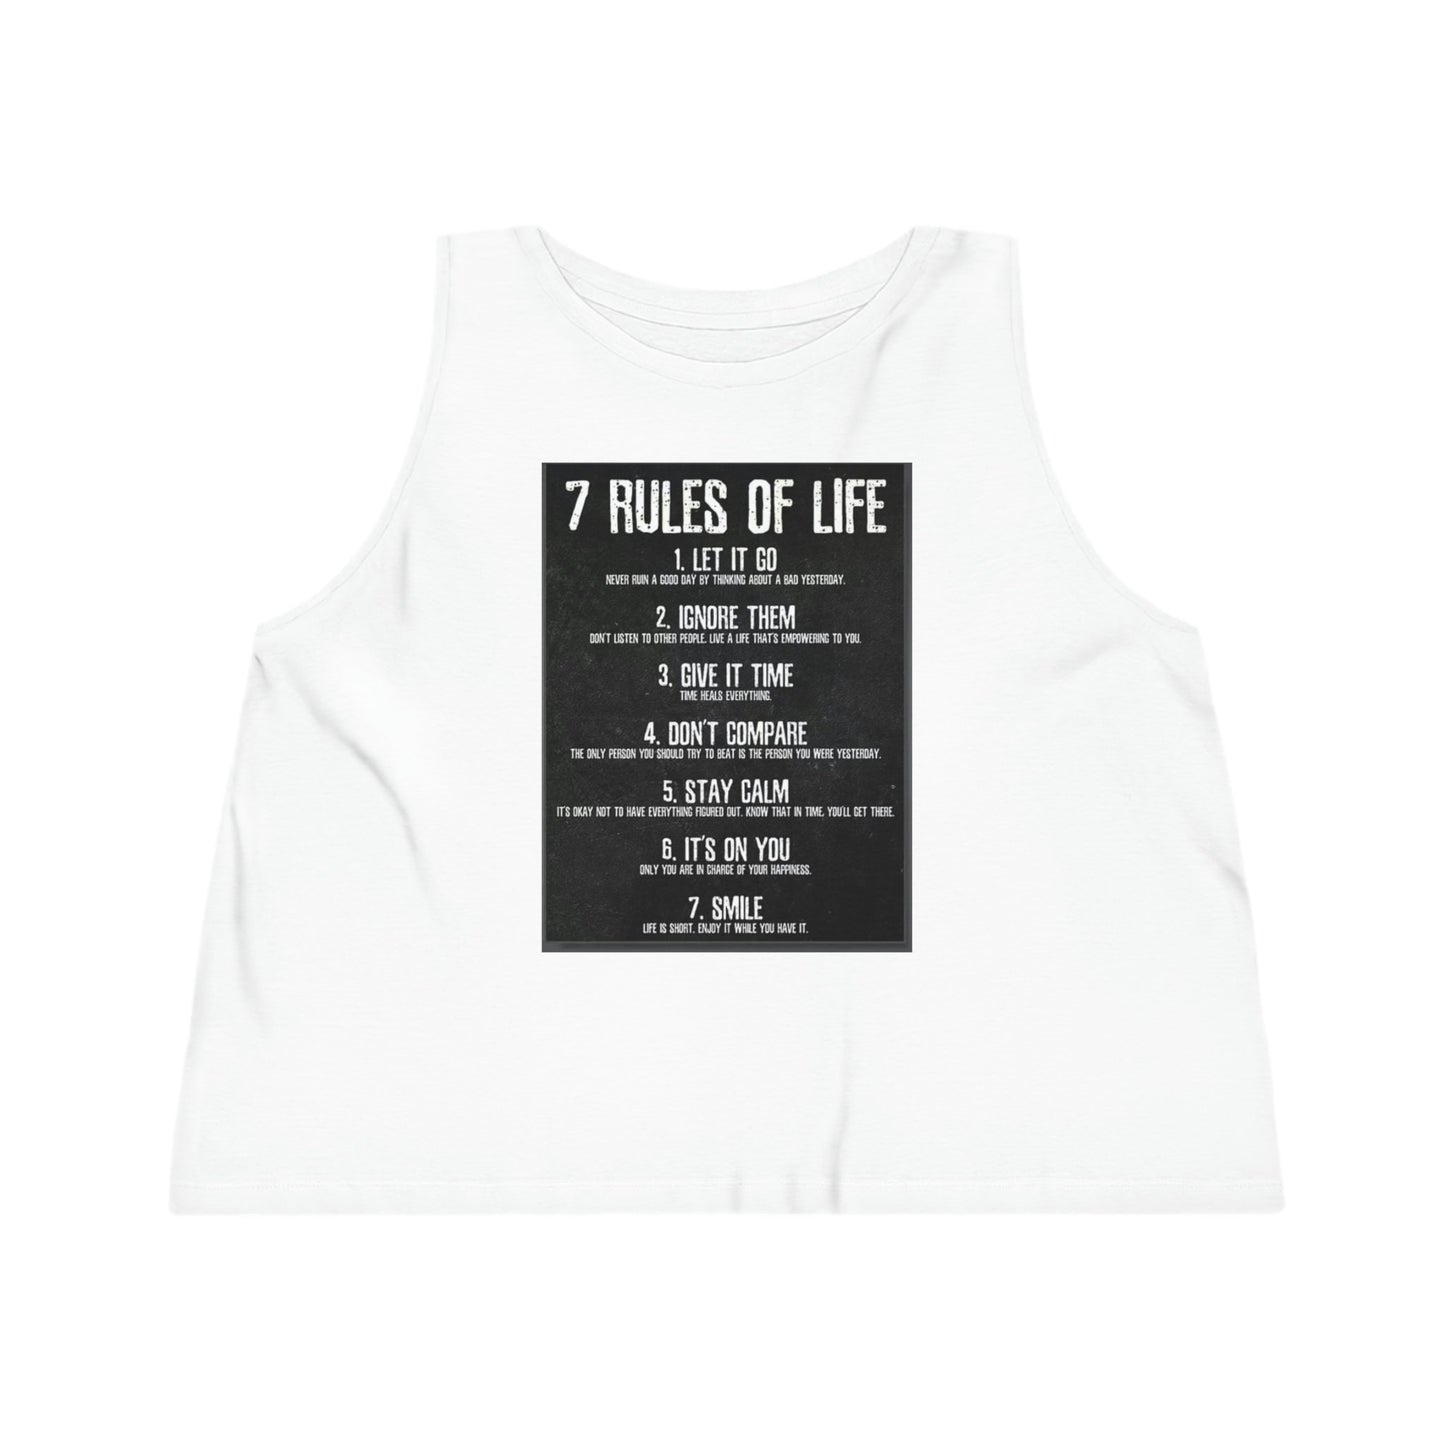 7 Rules of life T shirt*